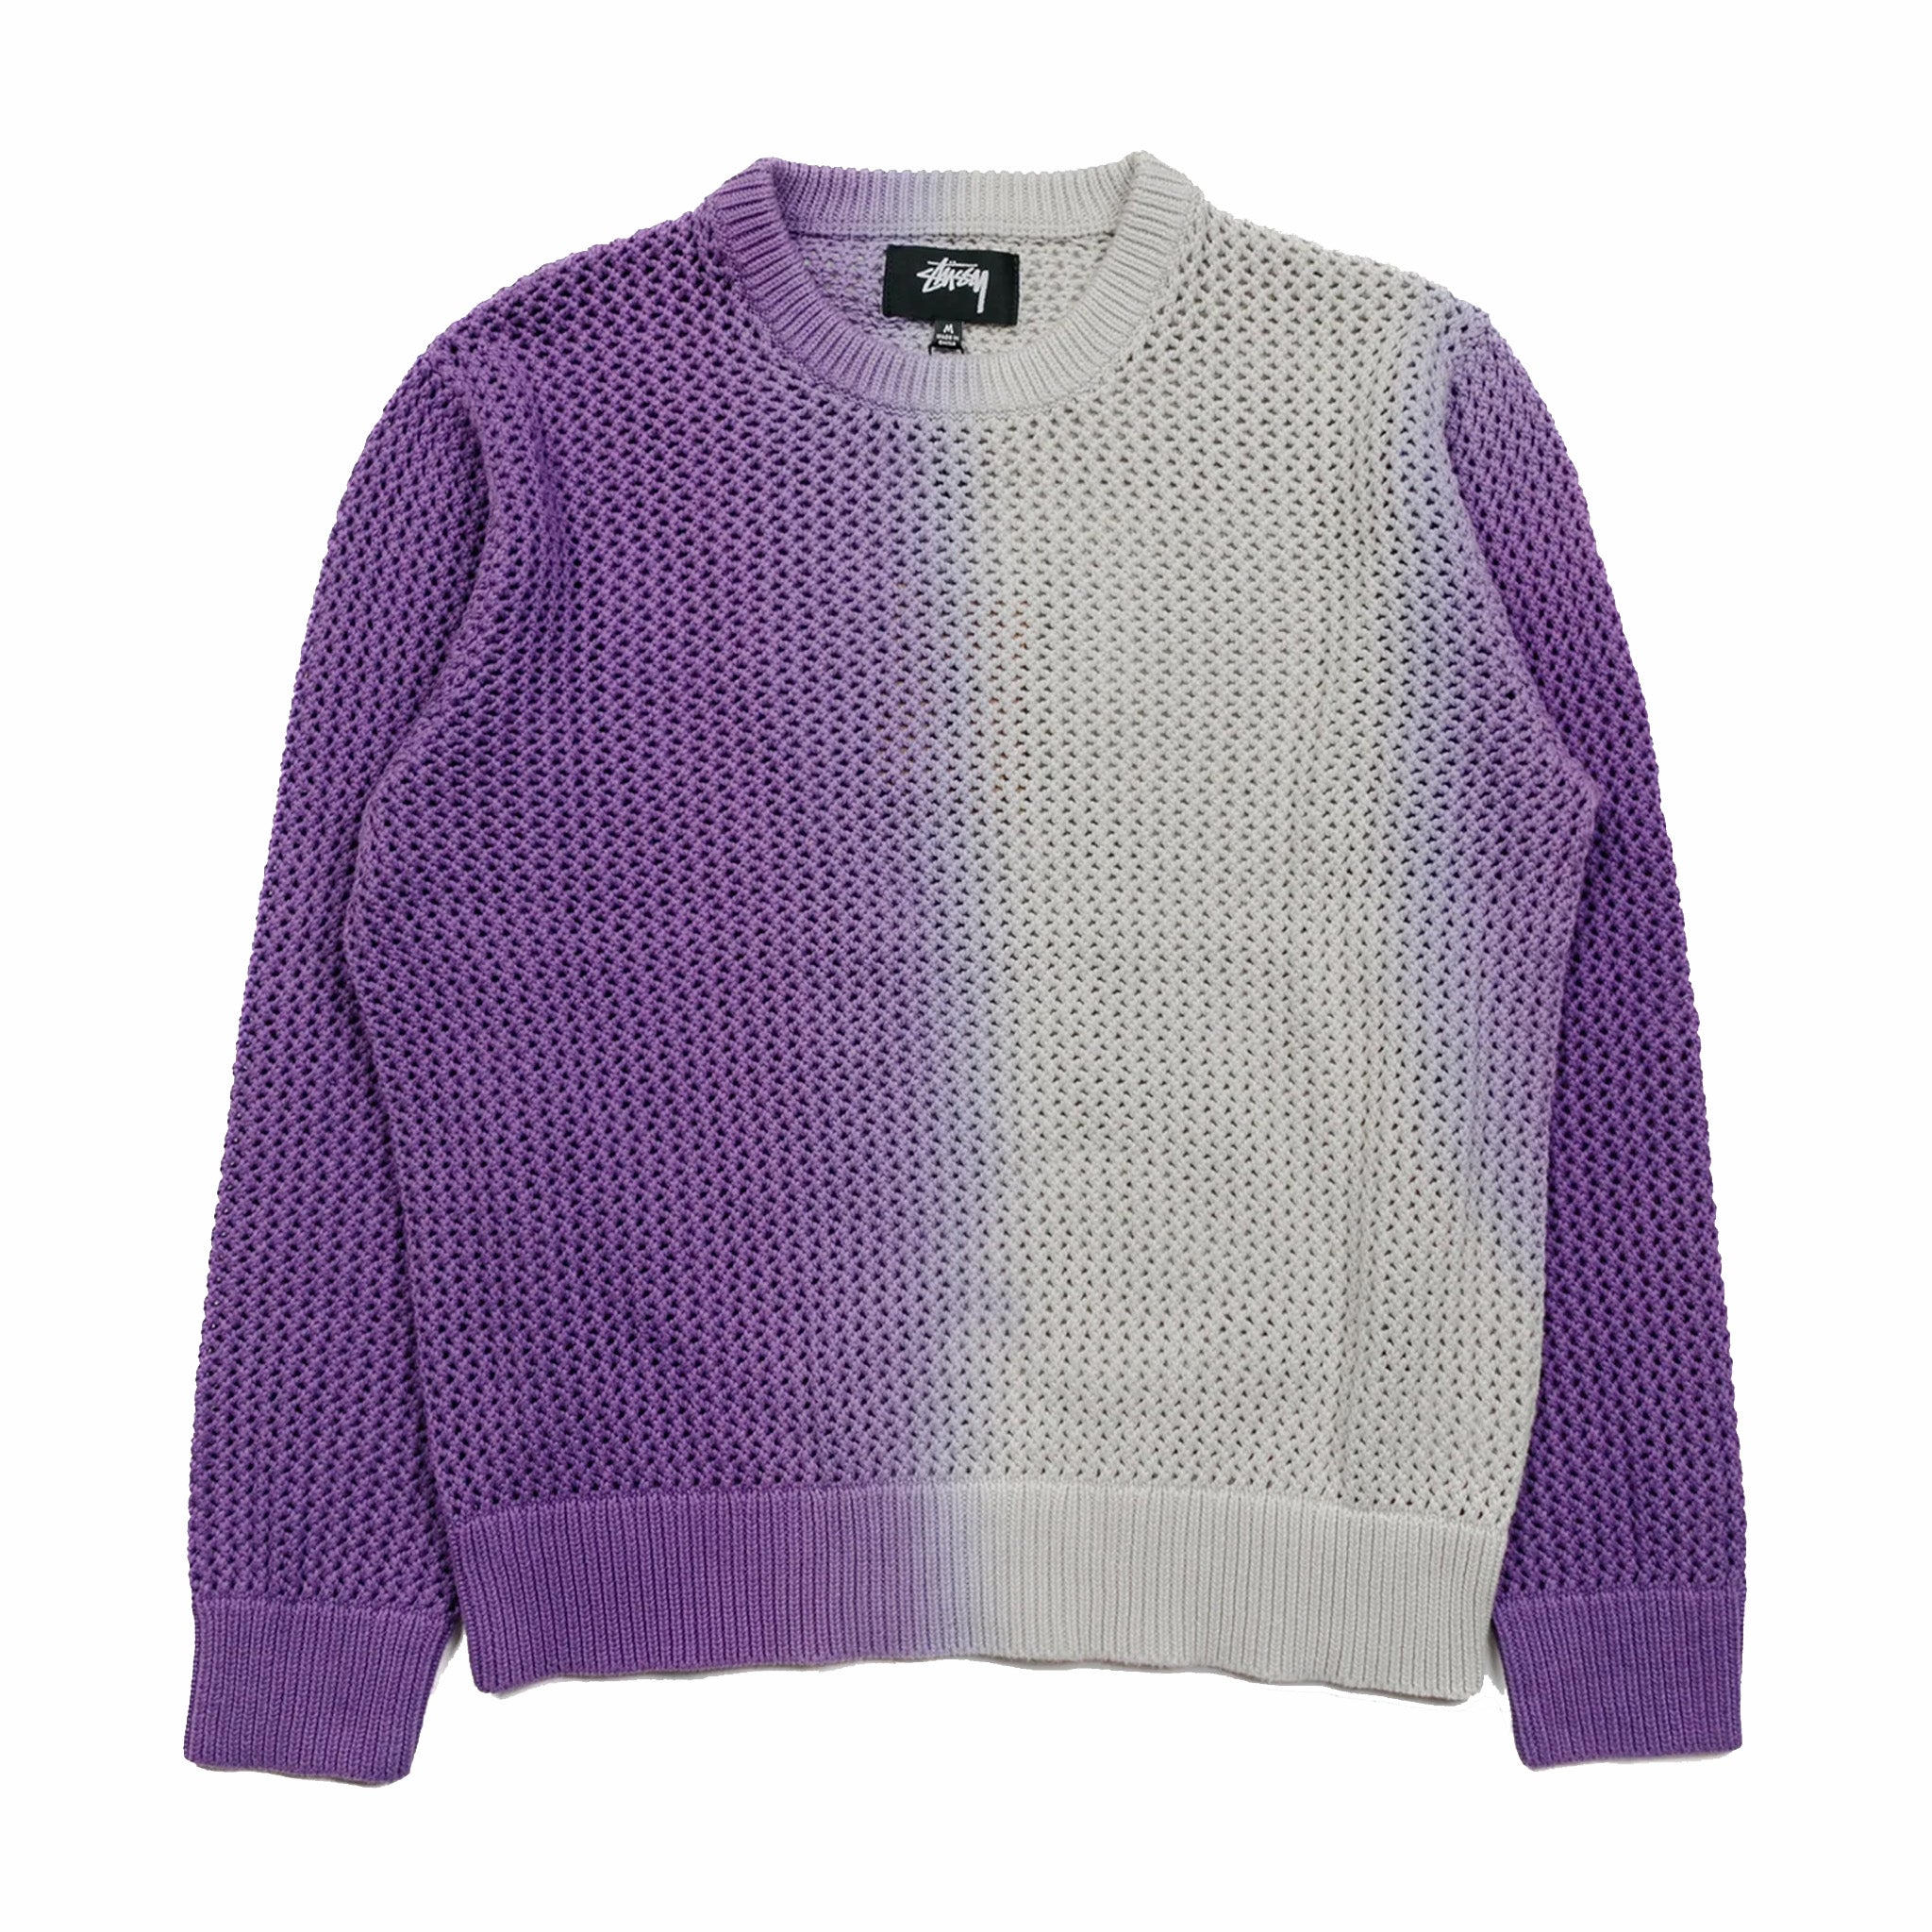 Stüssy Dyed Loose Guage Sweater (Purple) - August Shop